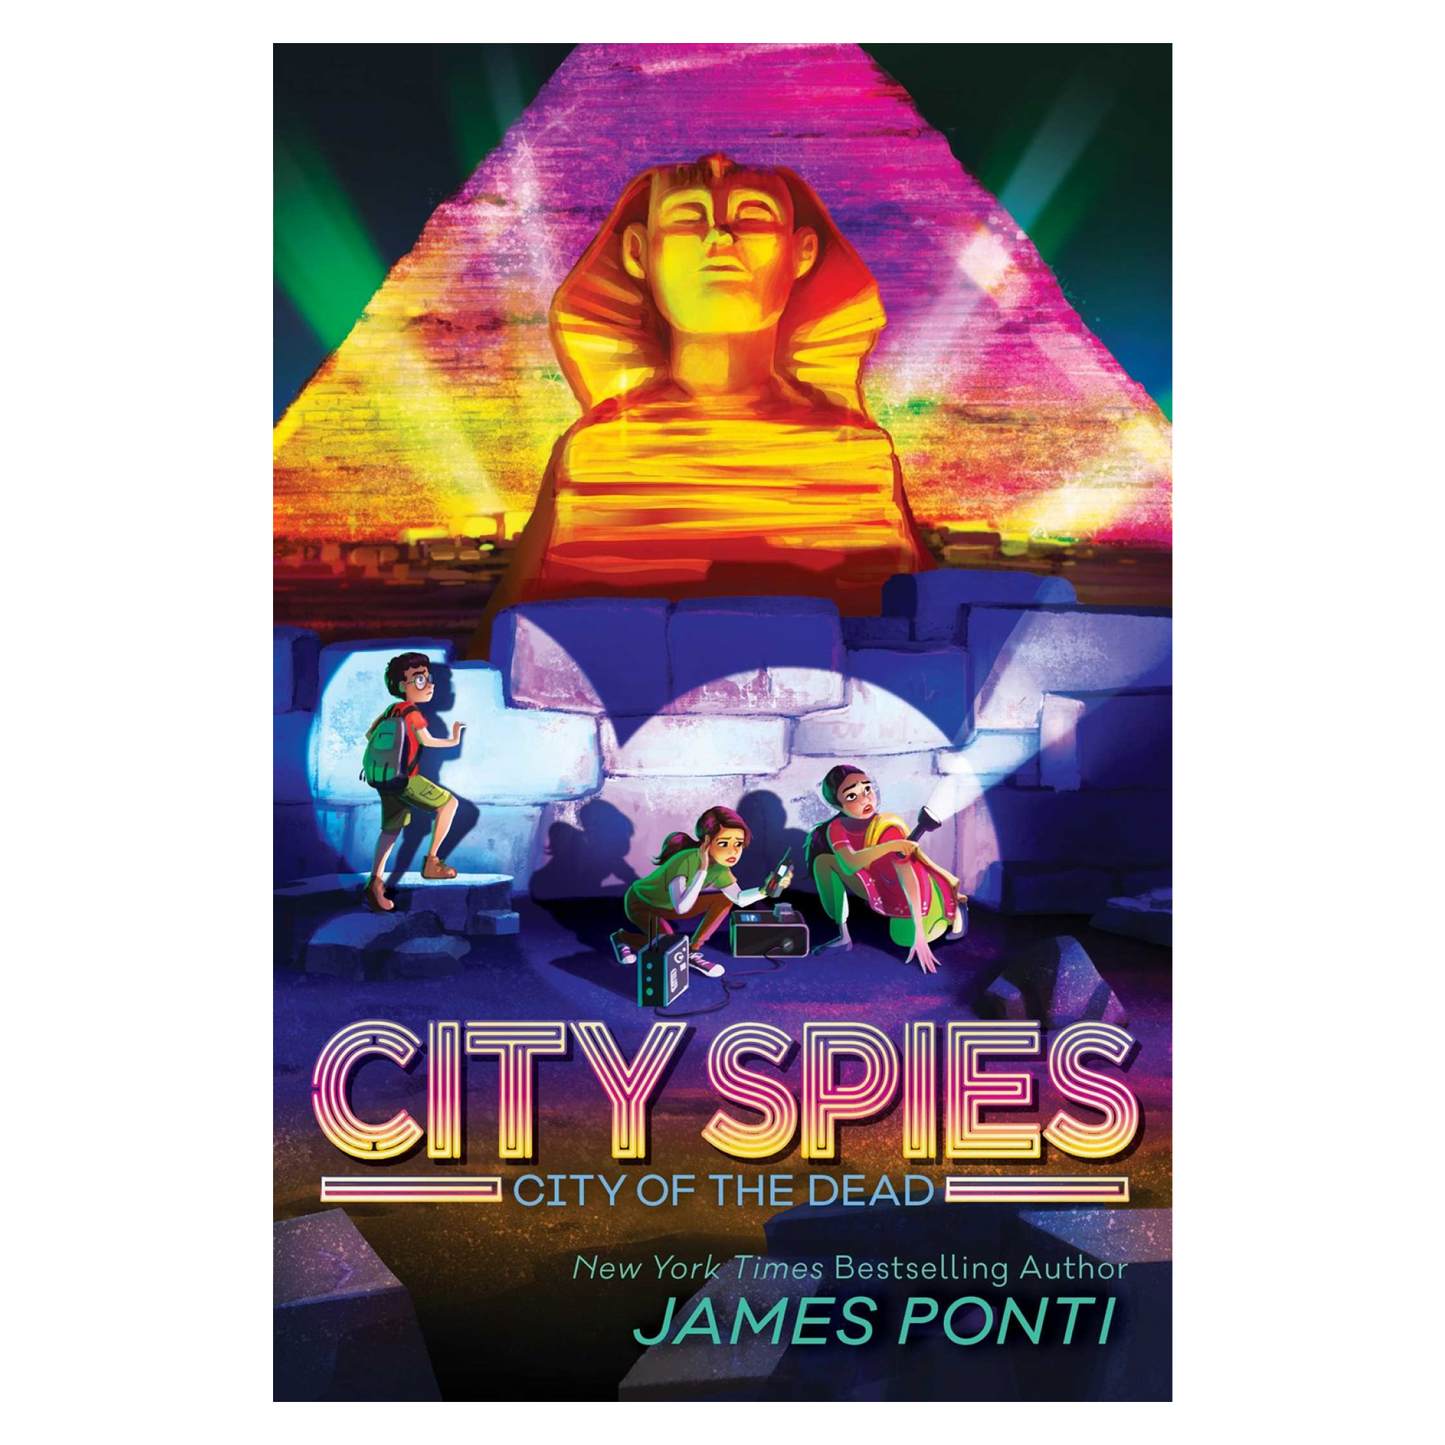 City Spies: City of the Dead